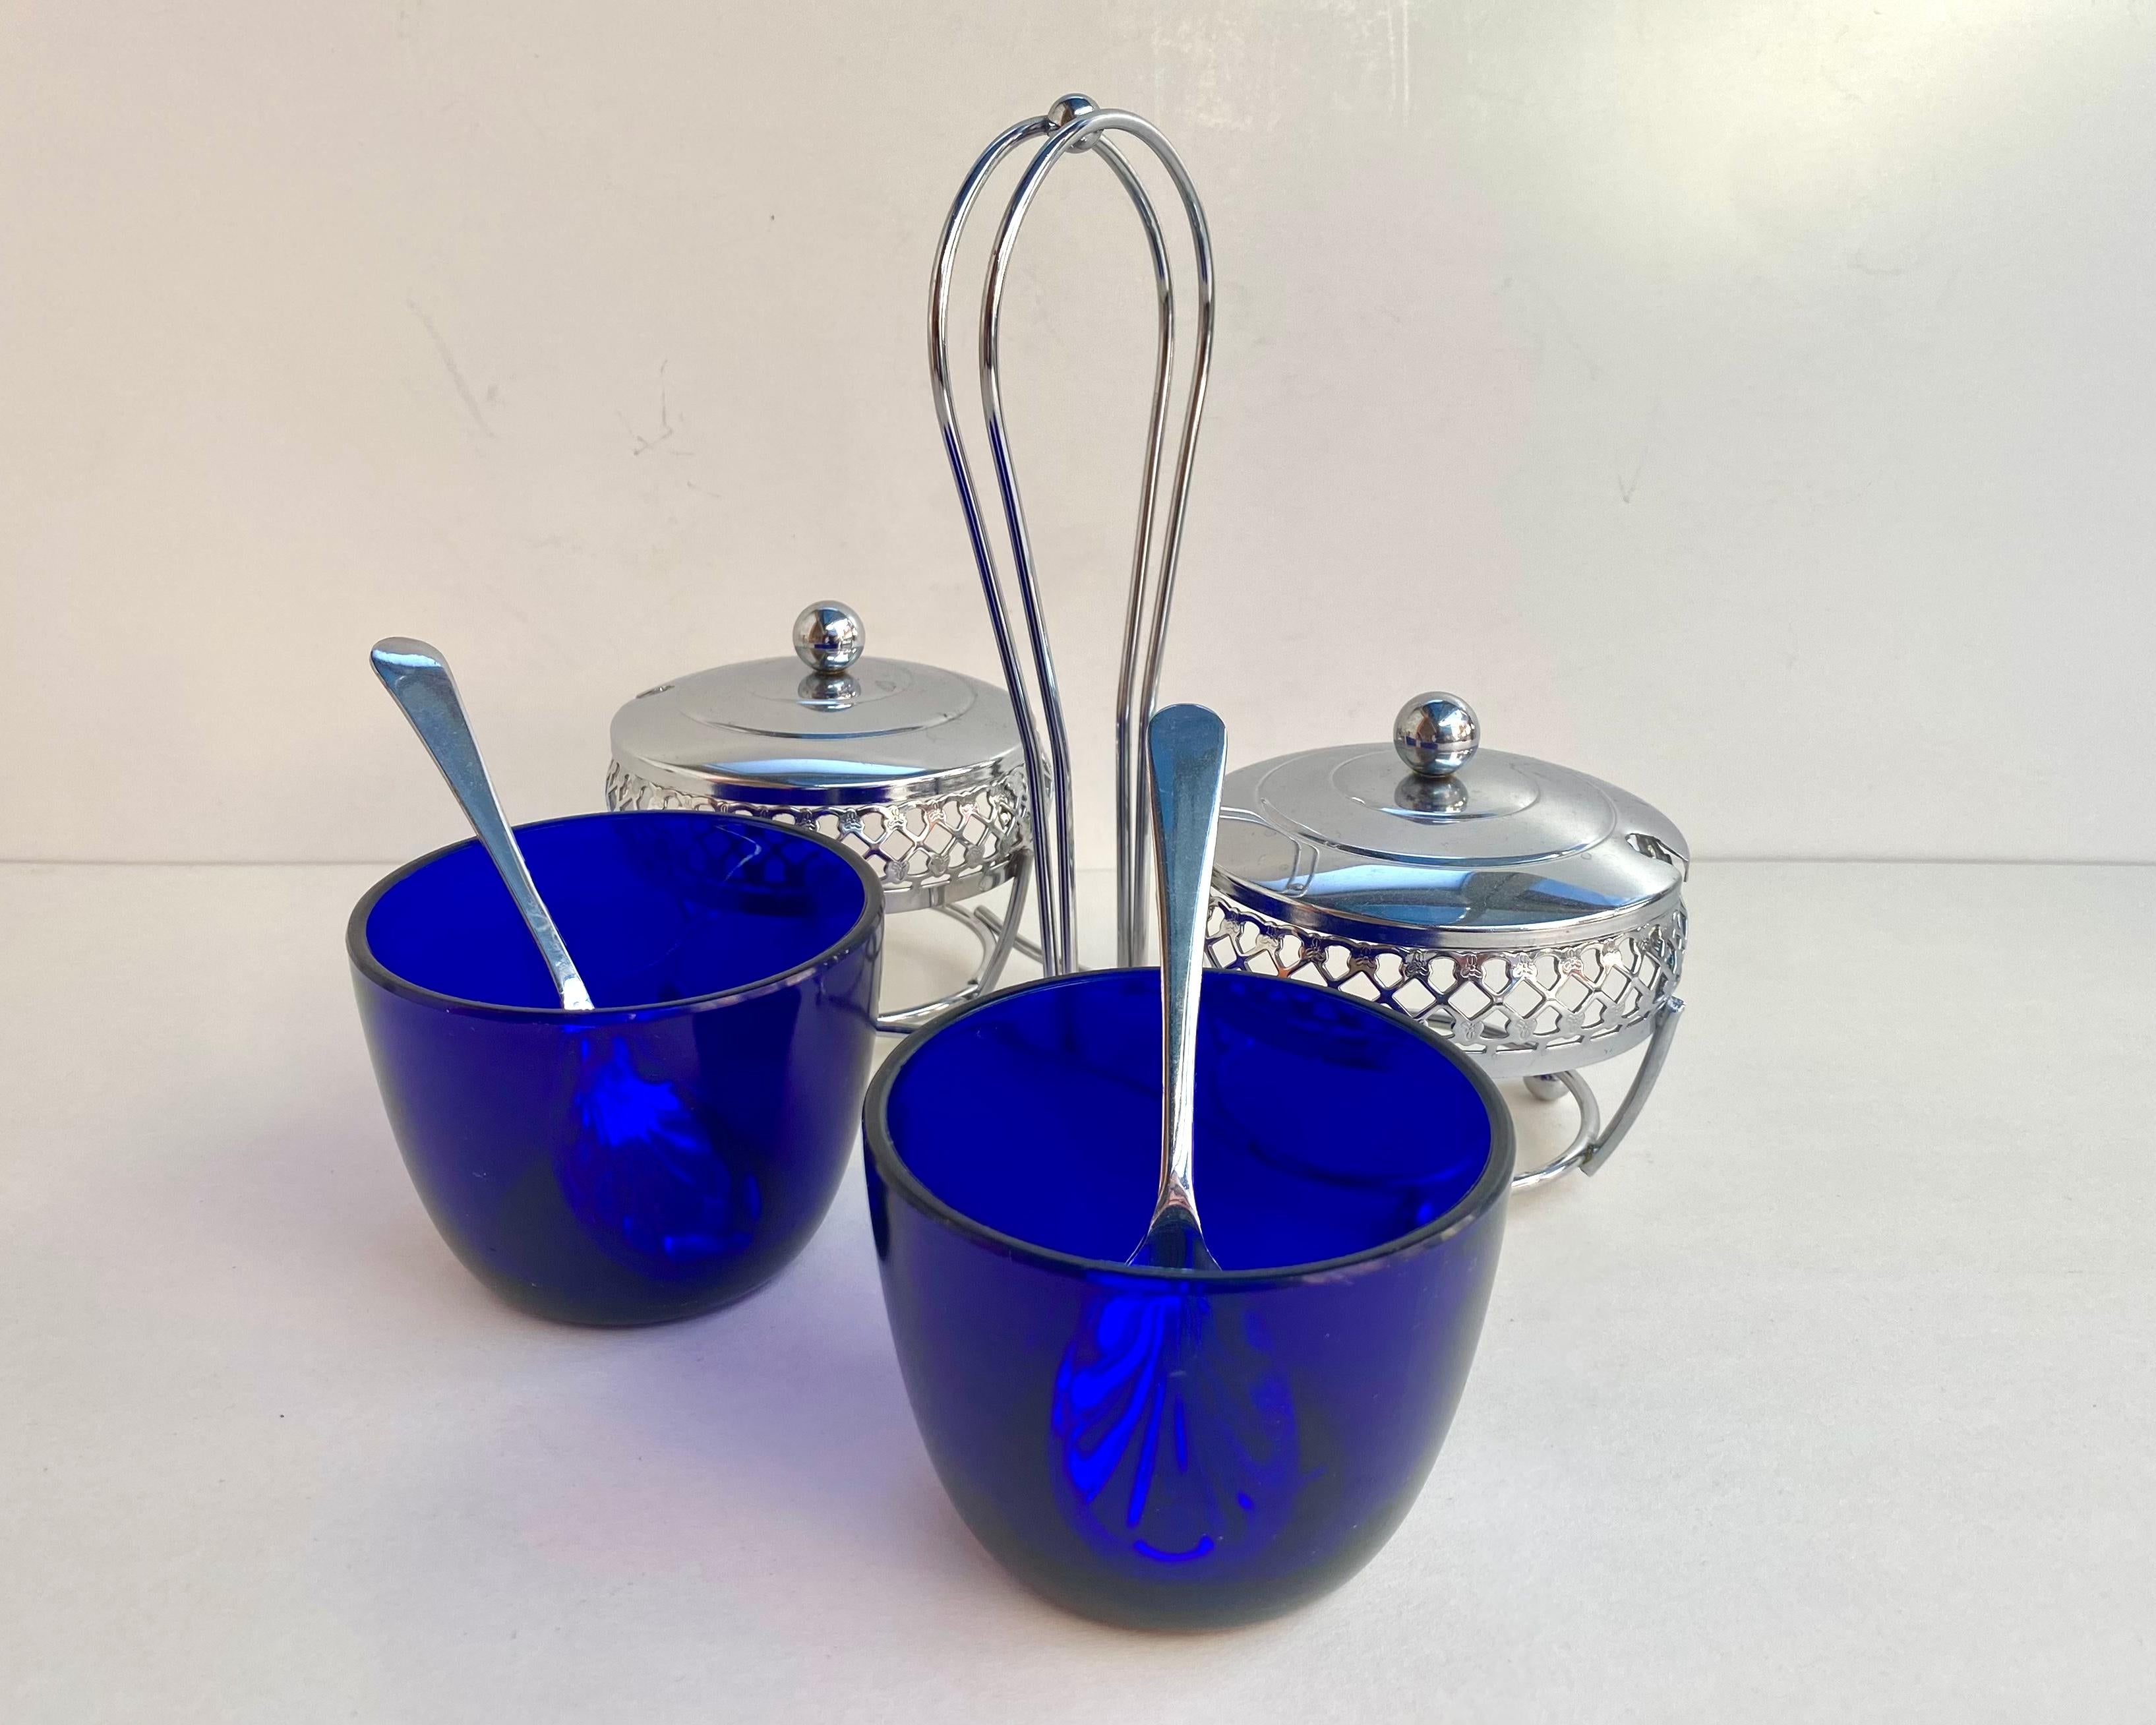 A lovely vintage cobalt blue glass sugar, jam or jelly serving dish in a metal stand with a very pretty latticework chromium plated outer casting with ornate etched handle for transporting and two spoons.

This set comes with a lid with a hole for